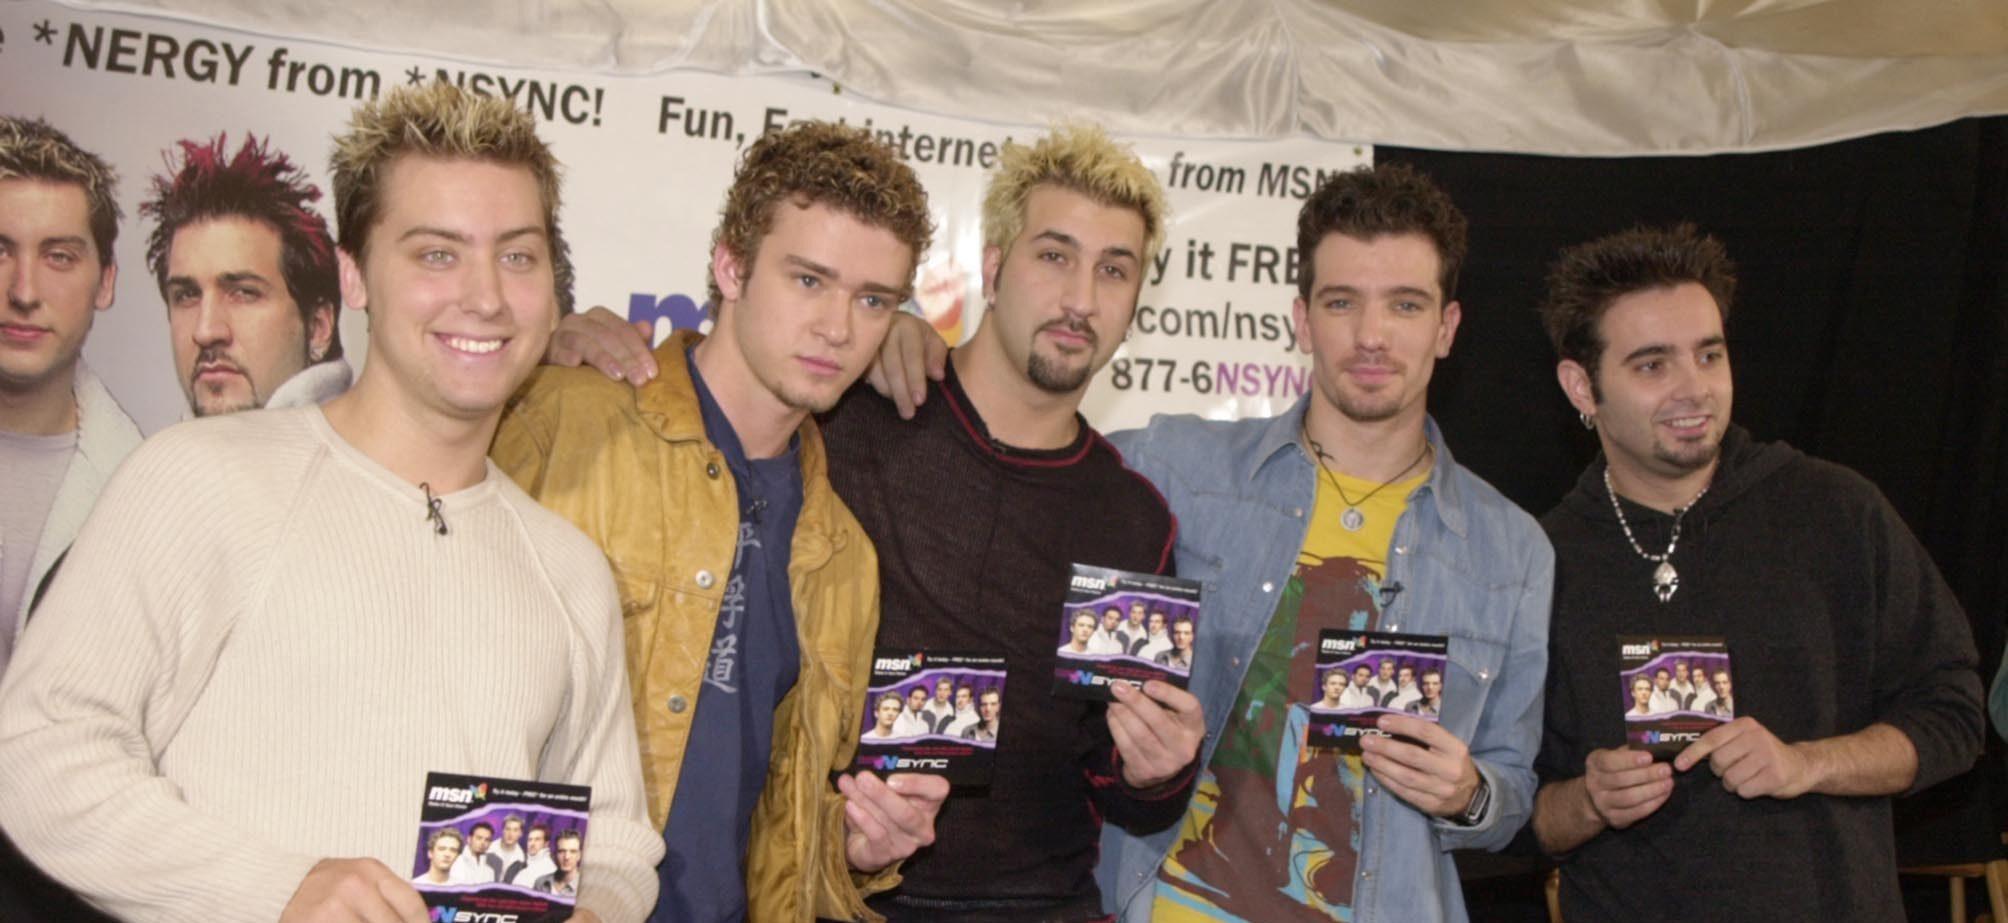 Justin Timberlake Teases Snippet Of New N’Sync Song!